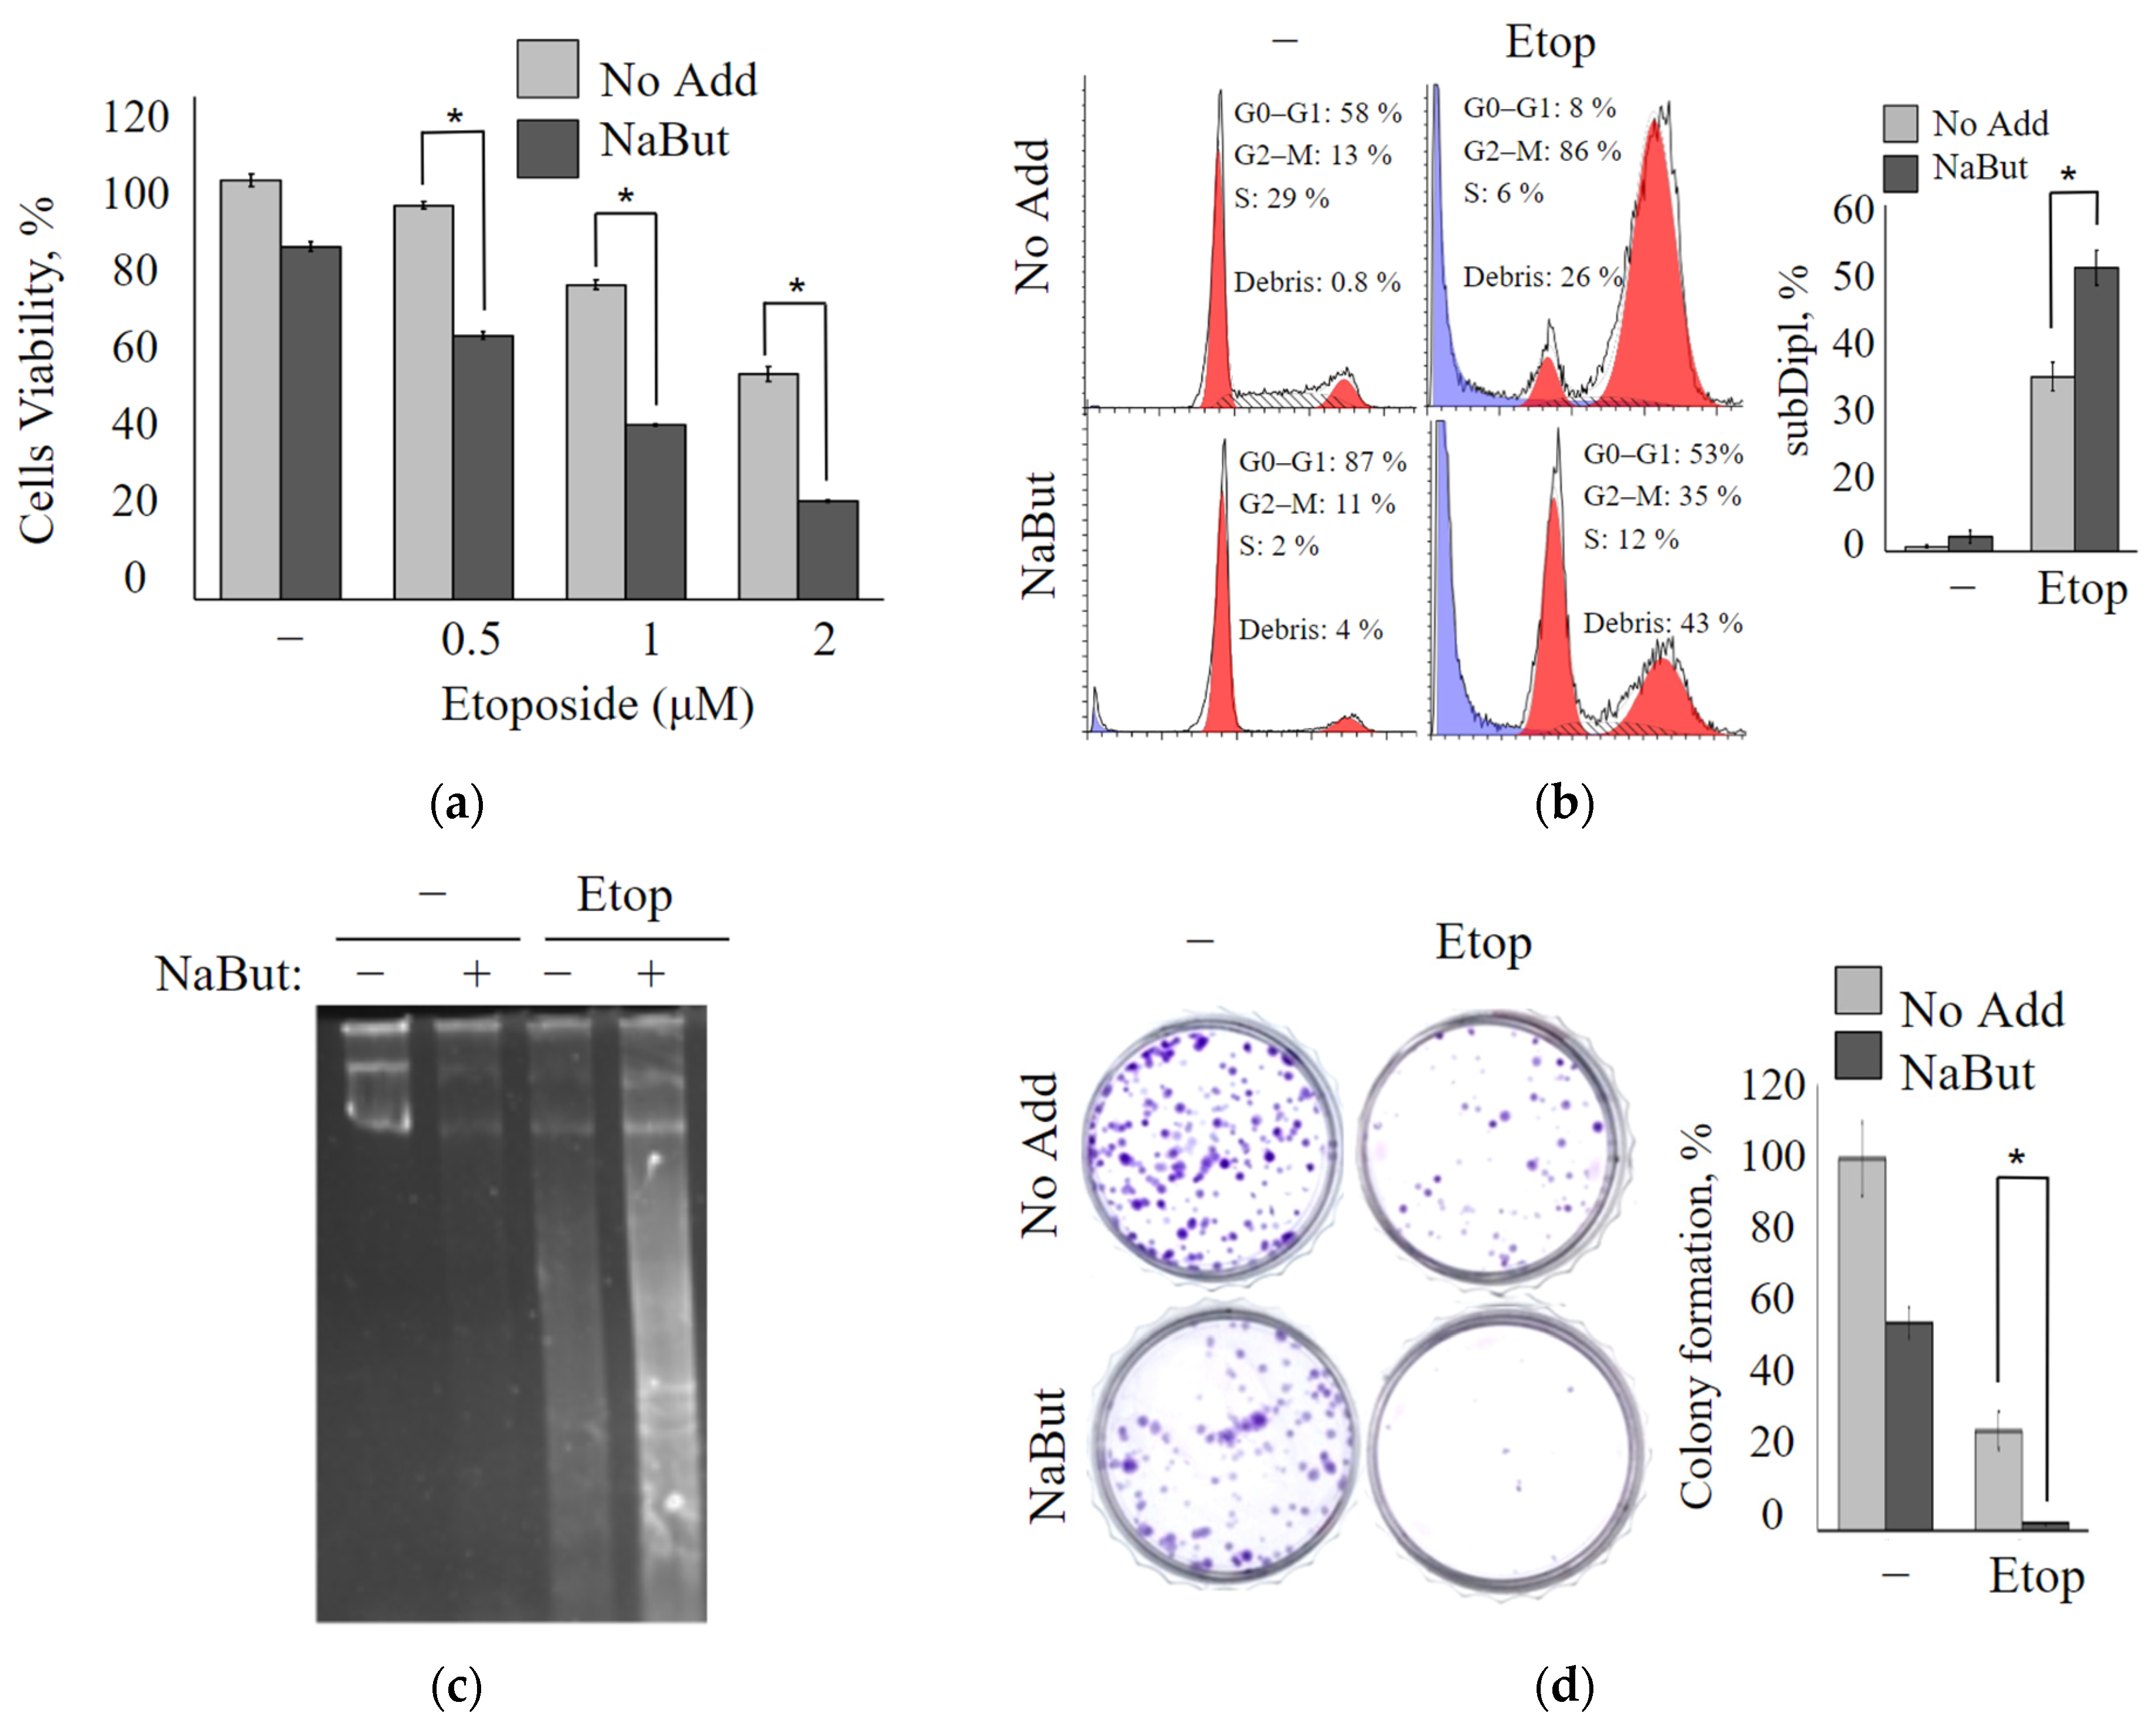 IJMS | Free Full-Text | Sodium Butyrate Enhances the Cytotoxic Effect of  Etoposide in HDACi-Sensitive and HDACi-Resistant Transformed Cells